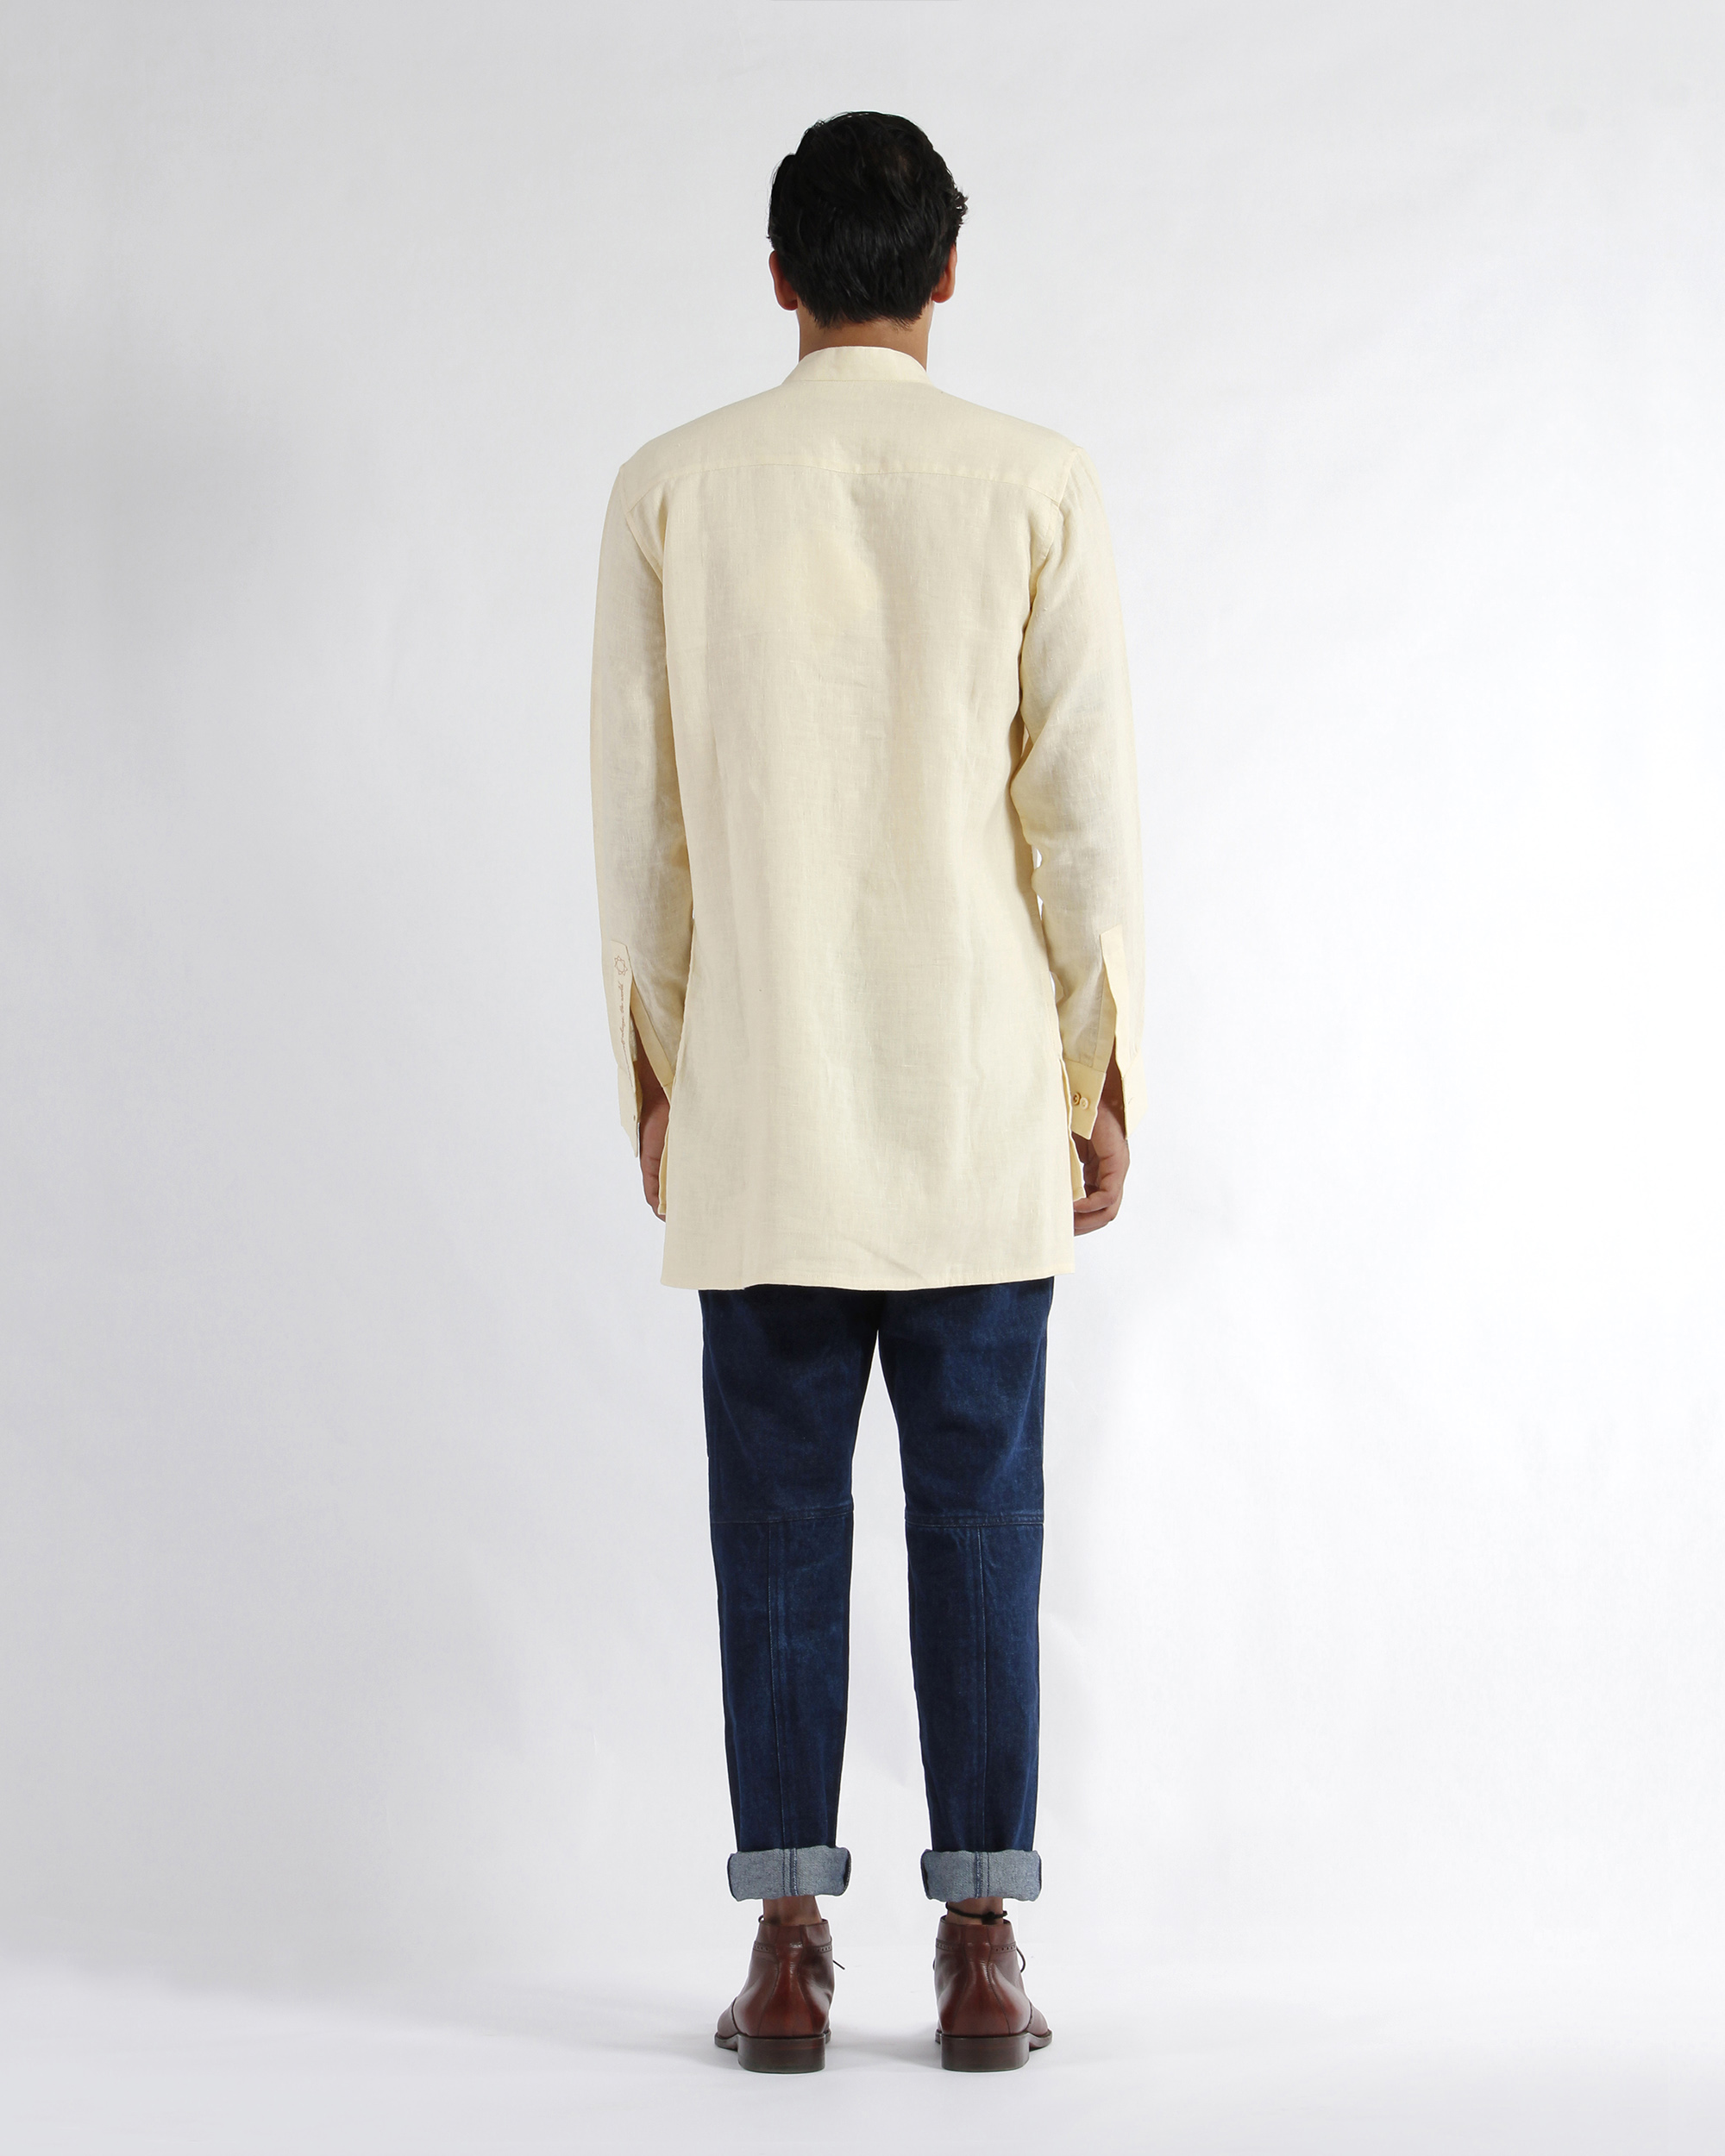 Off white linen embroidered tunic shirt by Dhatu Design Studio | The ...